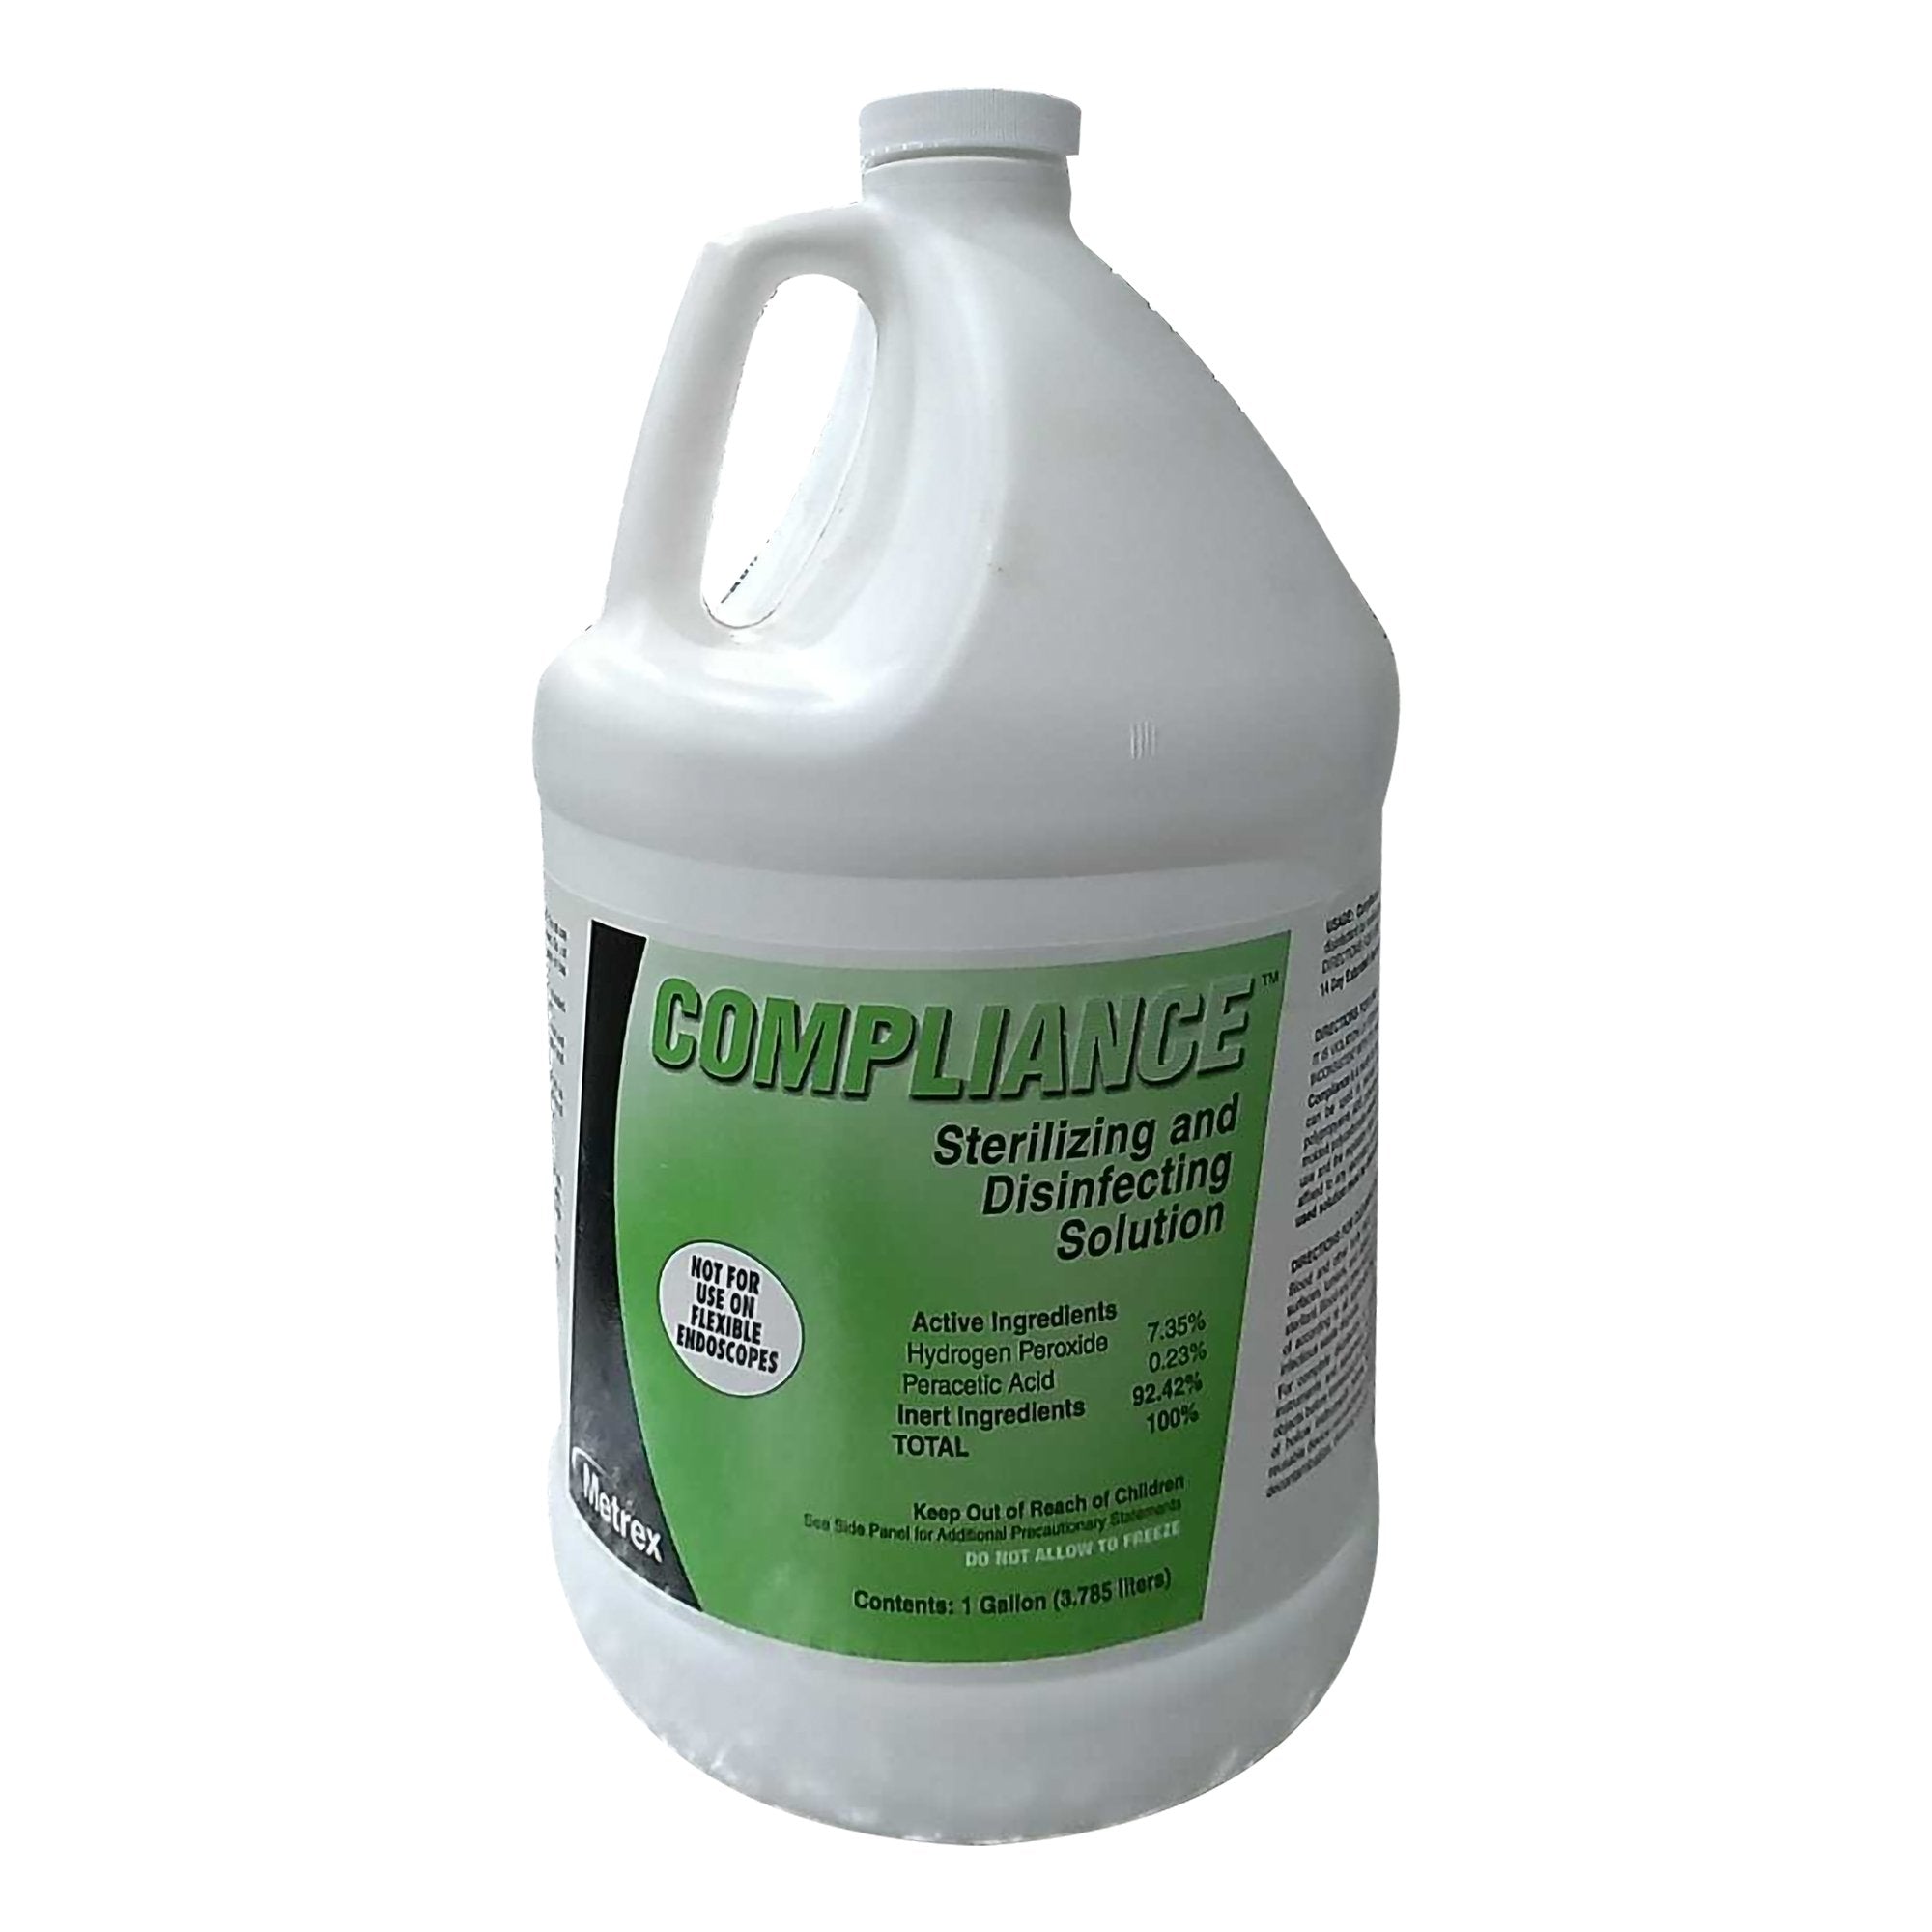 Compliance Surface Disinfectant Cleaner -Gallon of 1